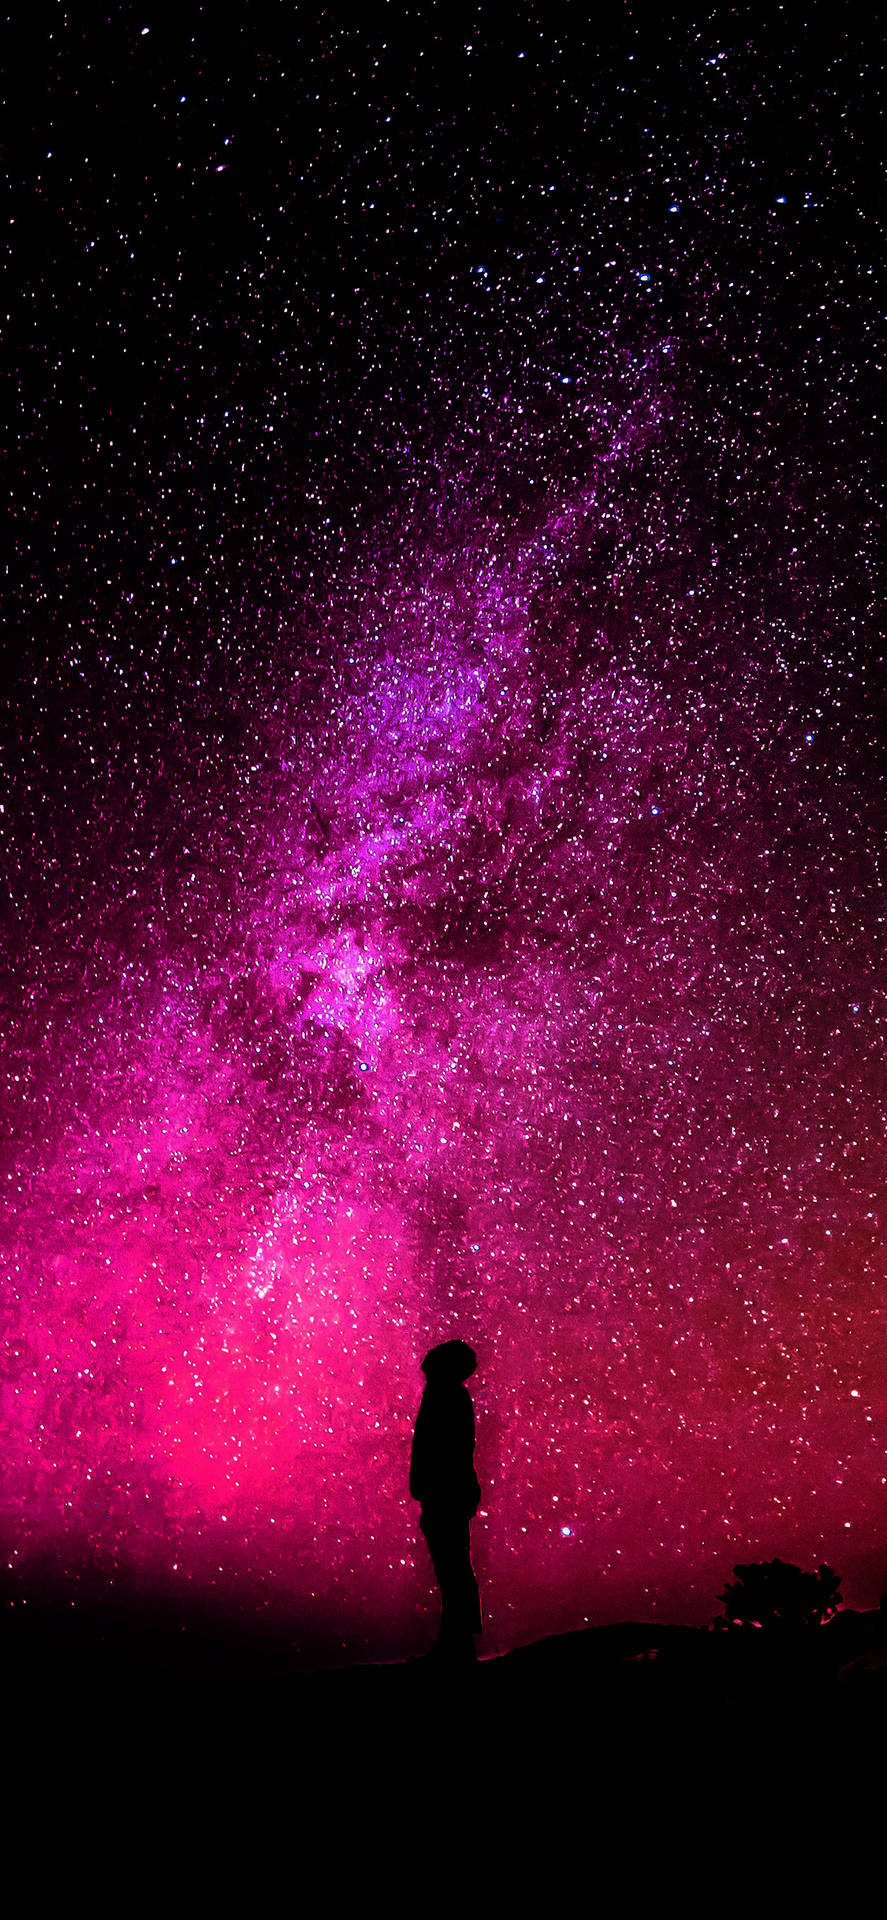 Man Silhouette Over Pink Galaxy Iphone Background